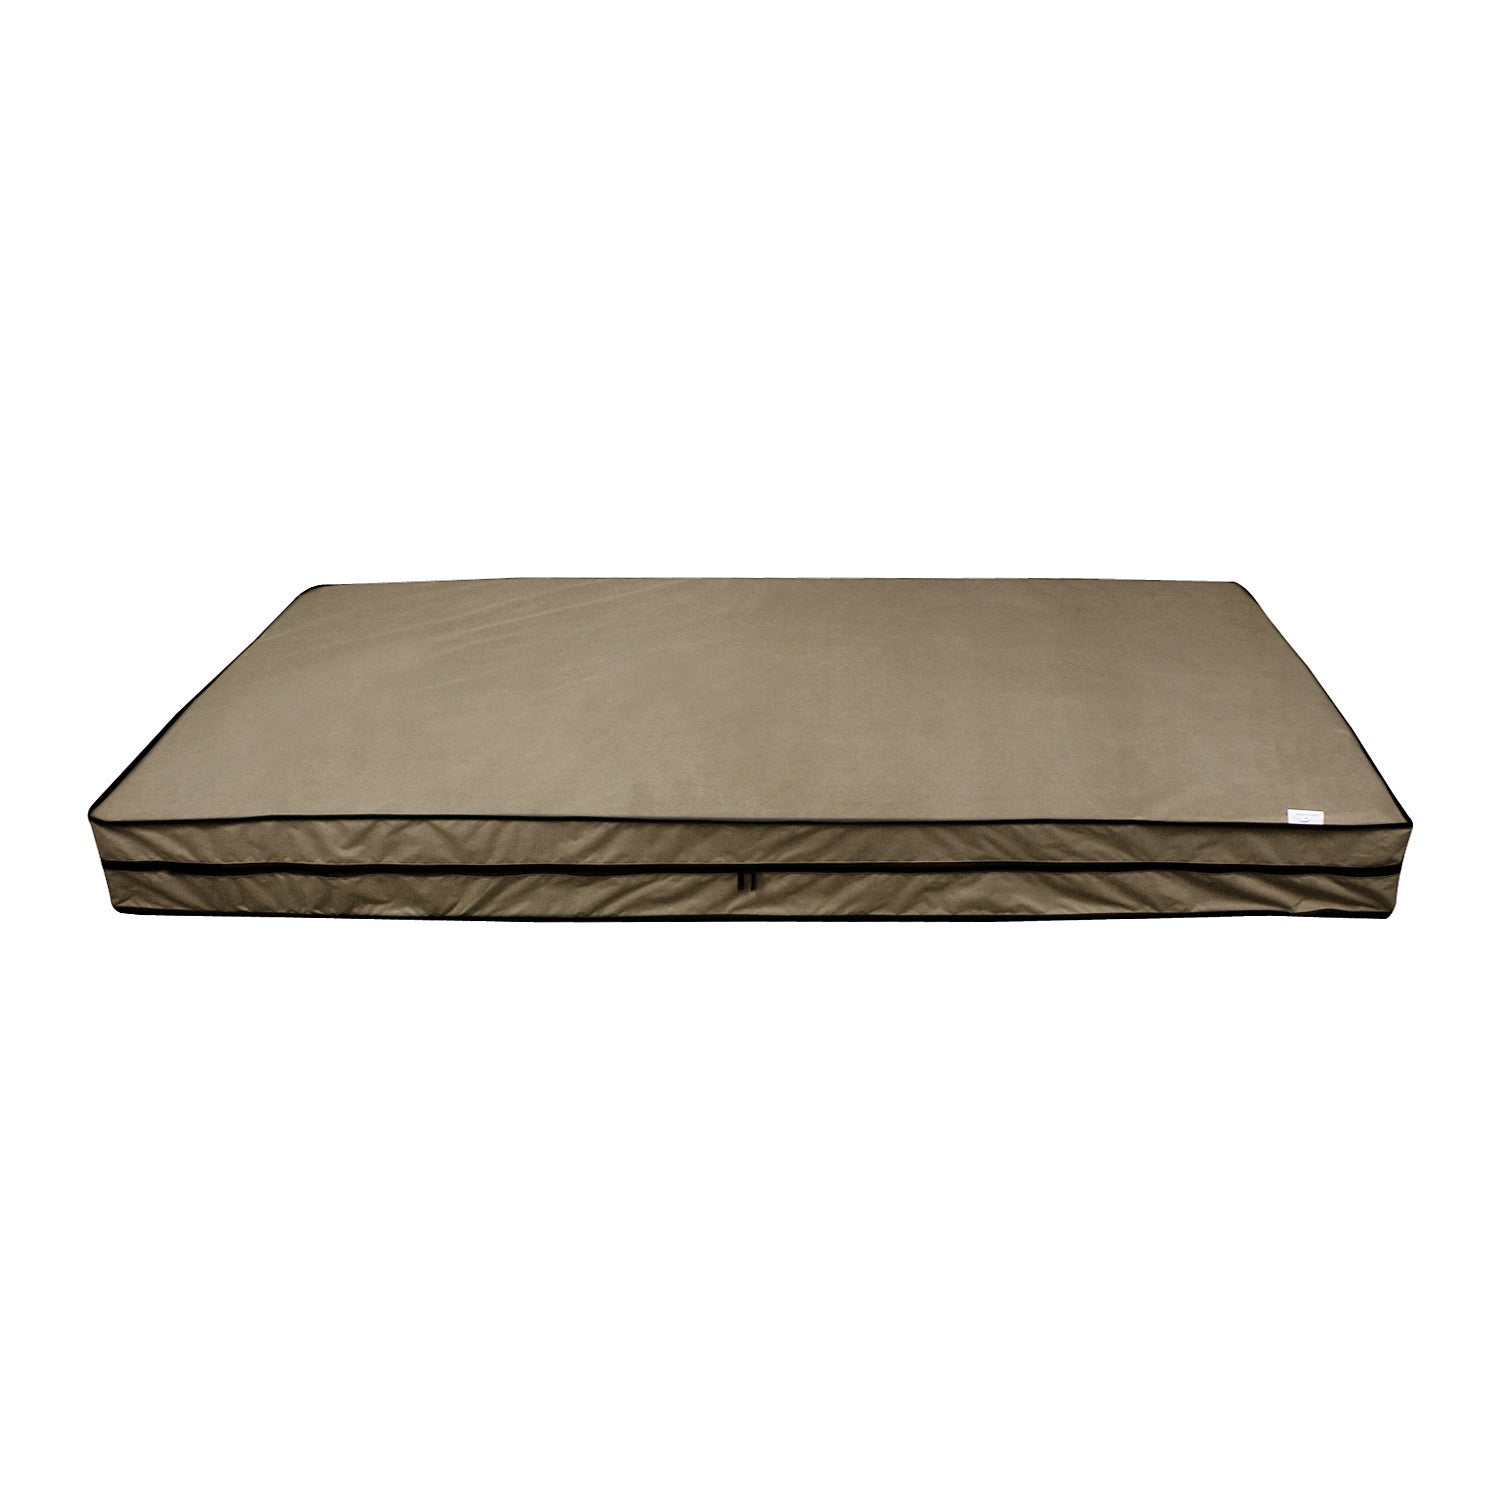 Waterproof Mattress Cover with Zipper, Mazestik Mattress Cover (Beige, Available in 17 Sizes)